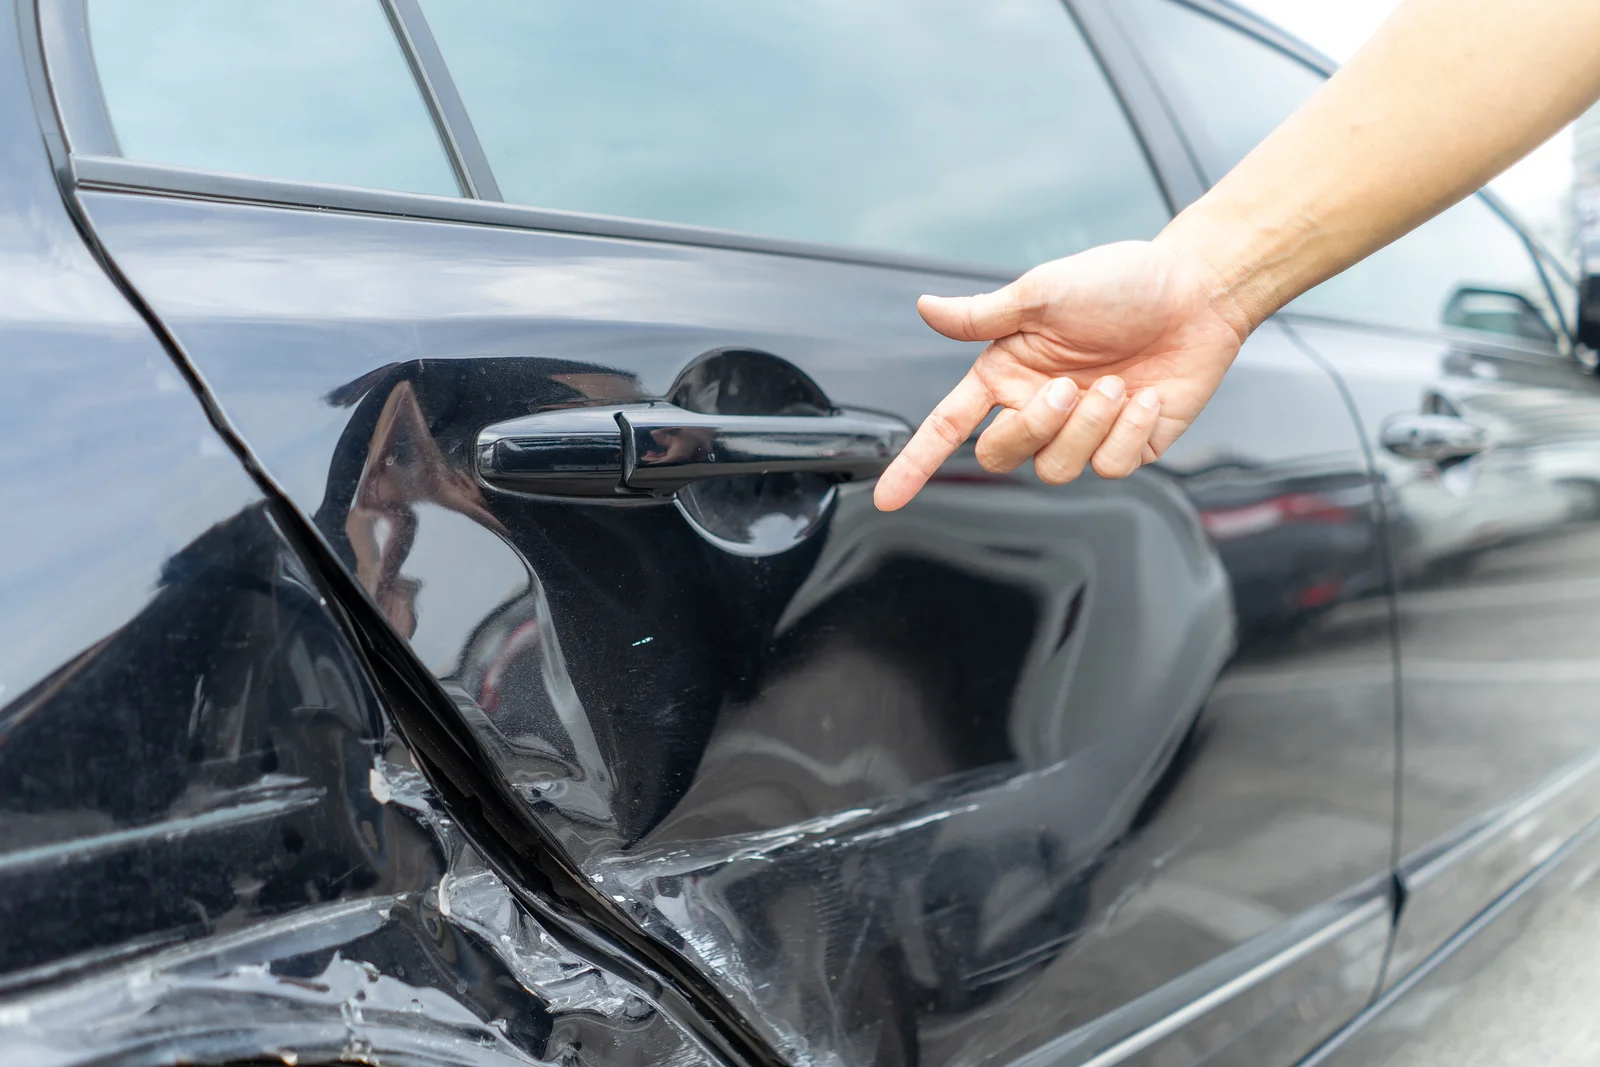 What To Do When Someone Hits Your Parked Car and Leaves in California